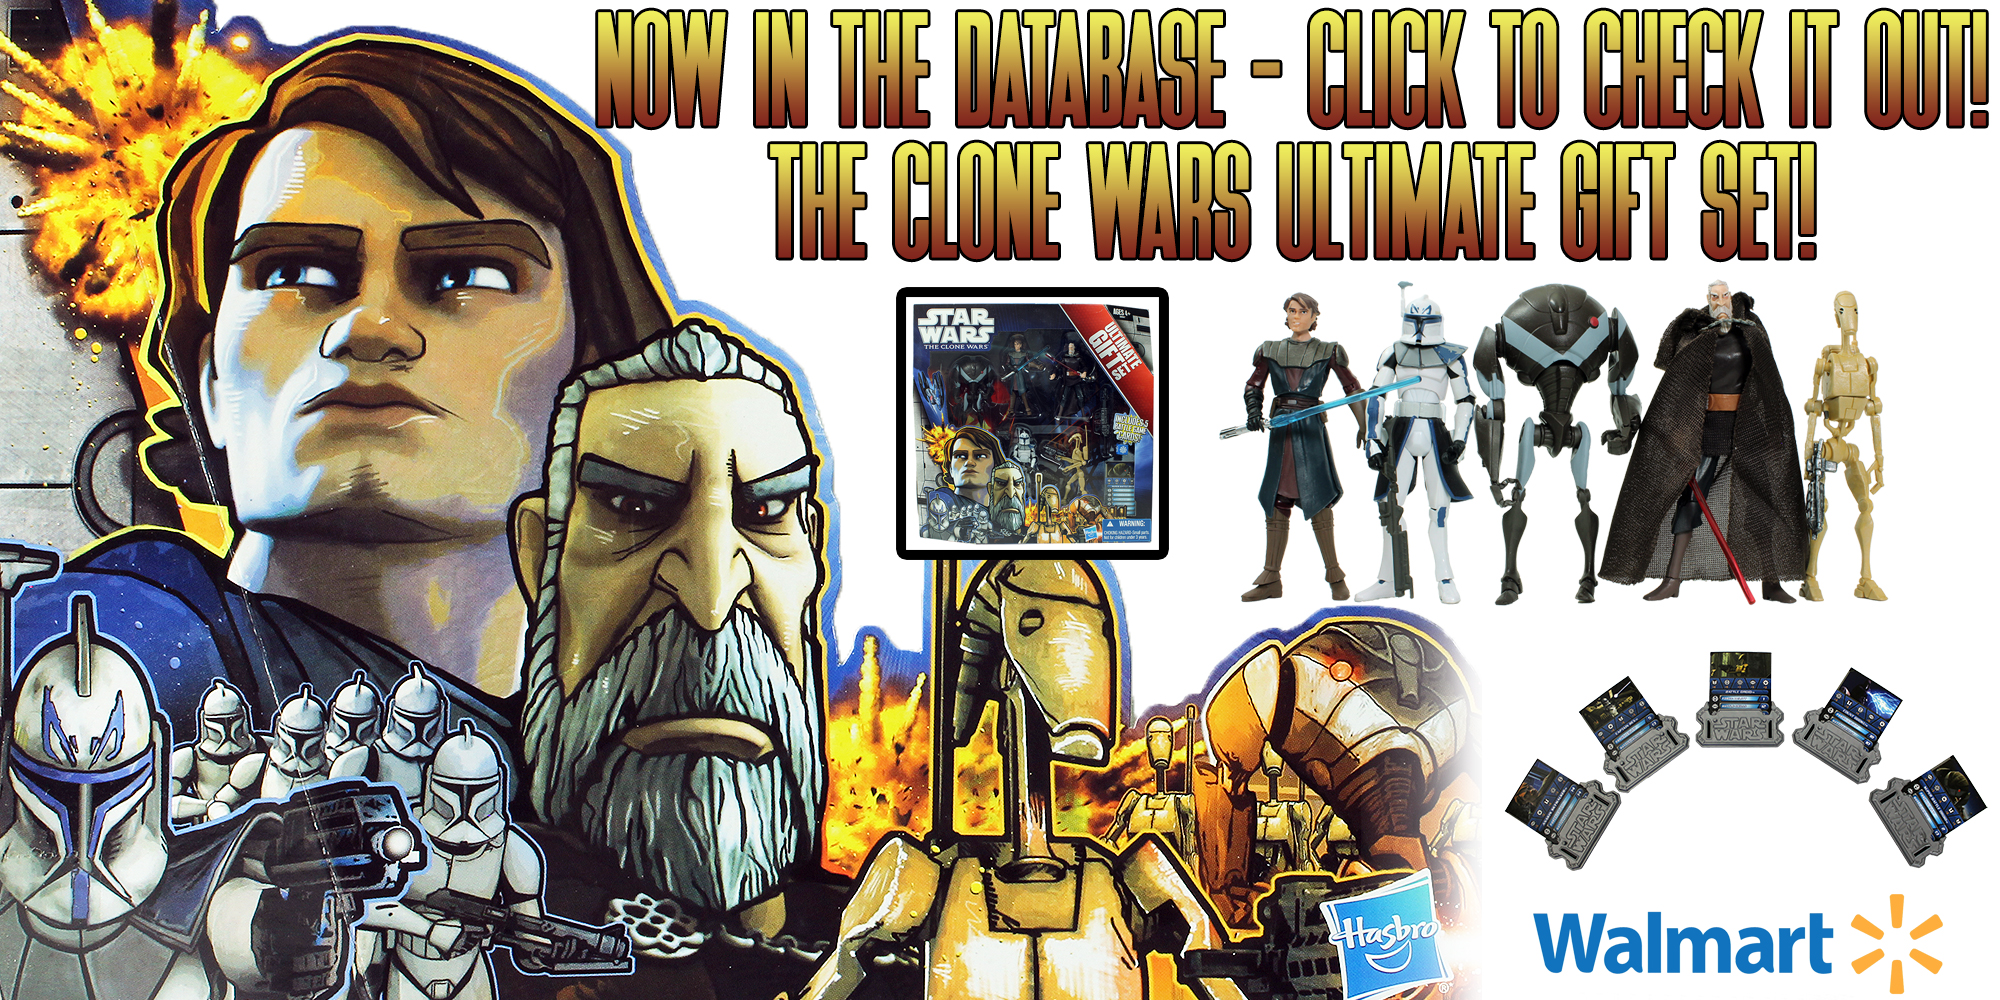 New Addition: The Clone Wars Ultimate Gift Set 5-Pack